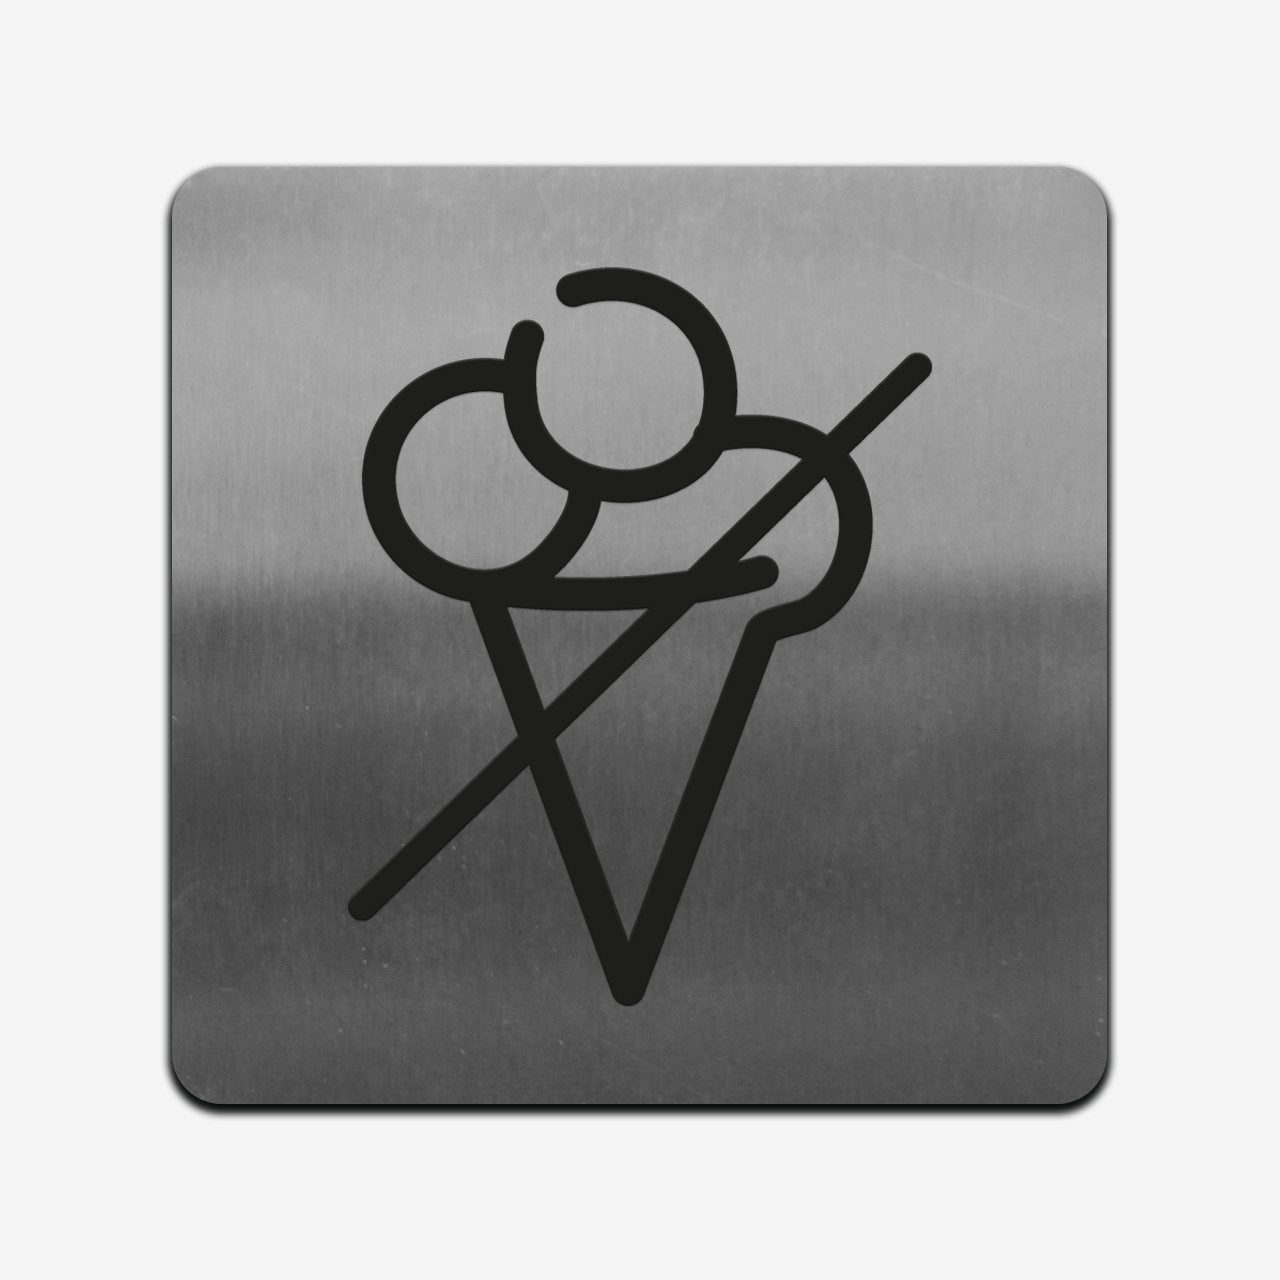 No Ice Cream - Stainless Steel Sign Information signs square Bsign